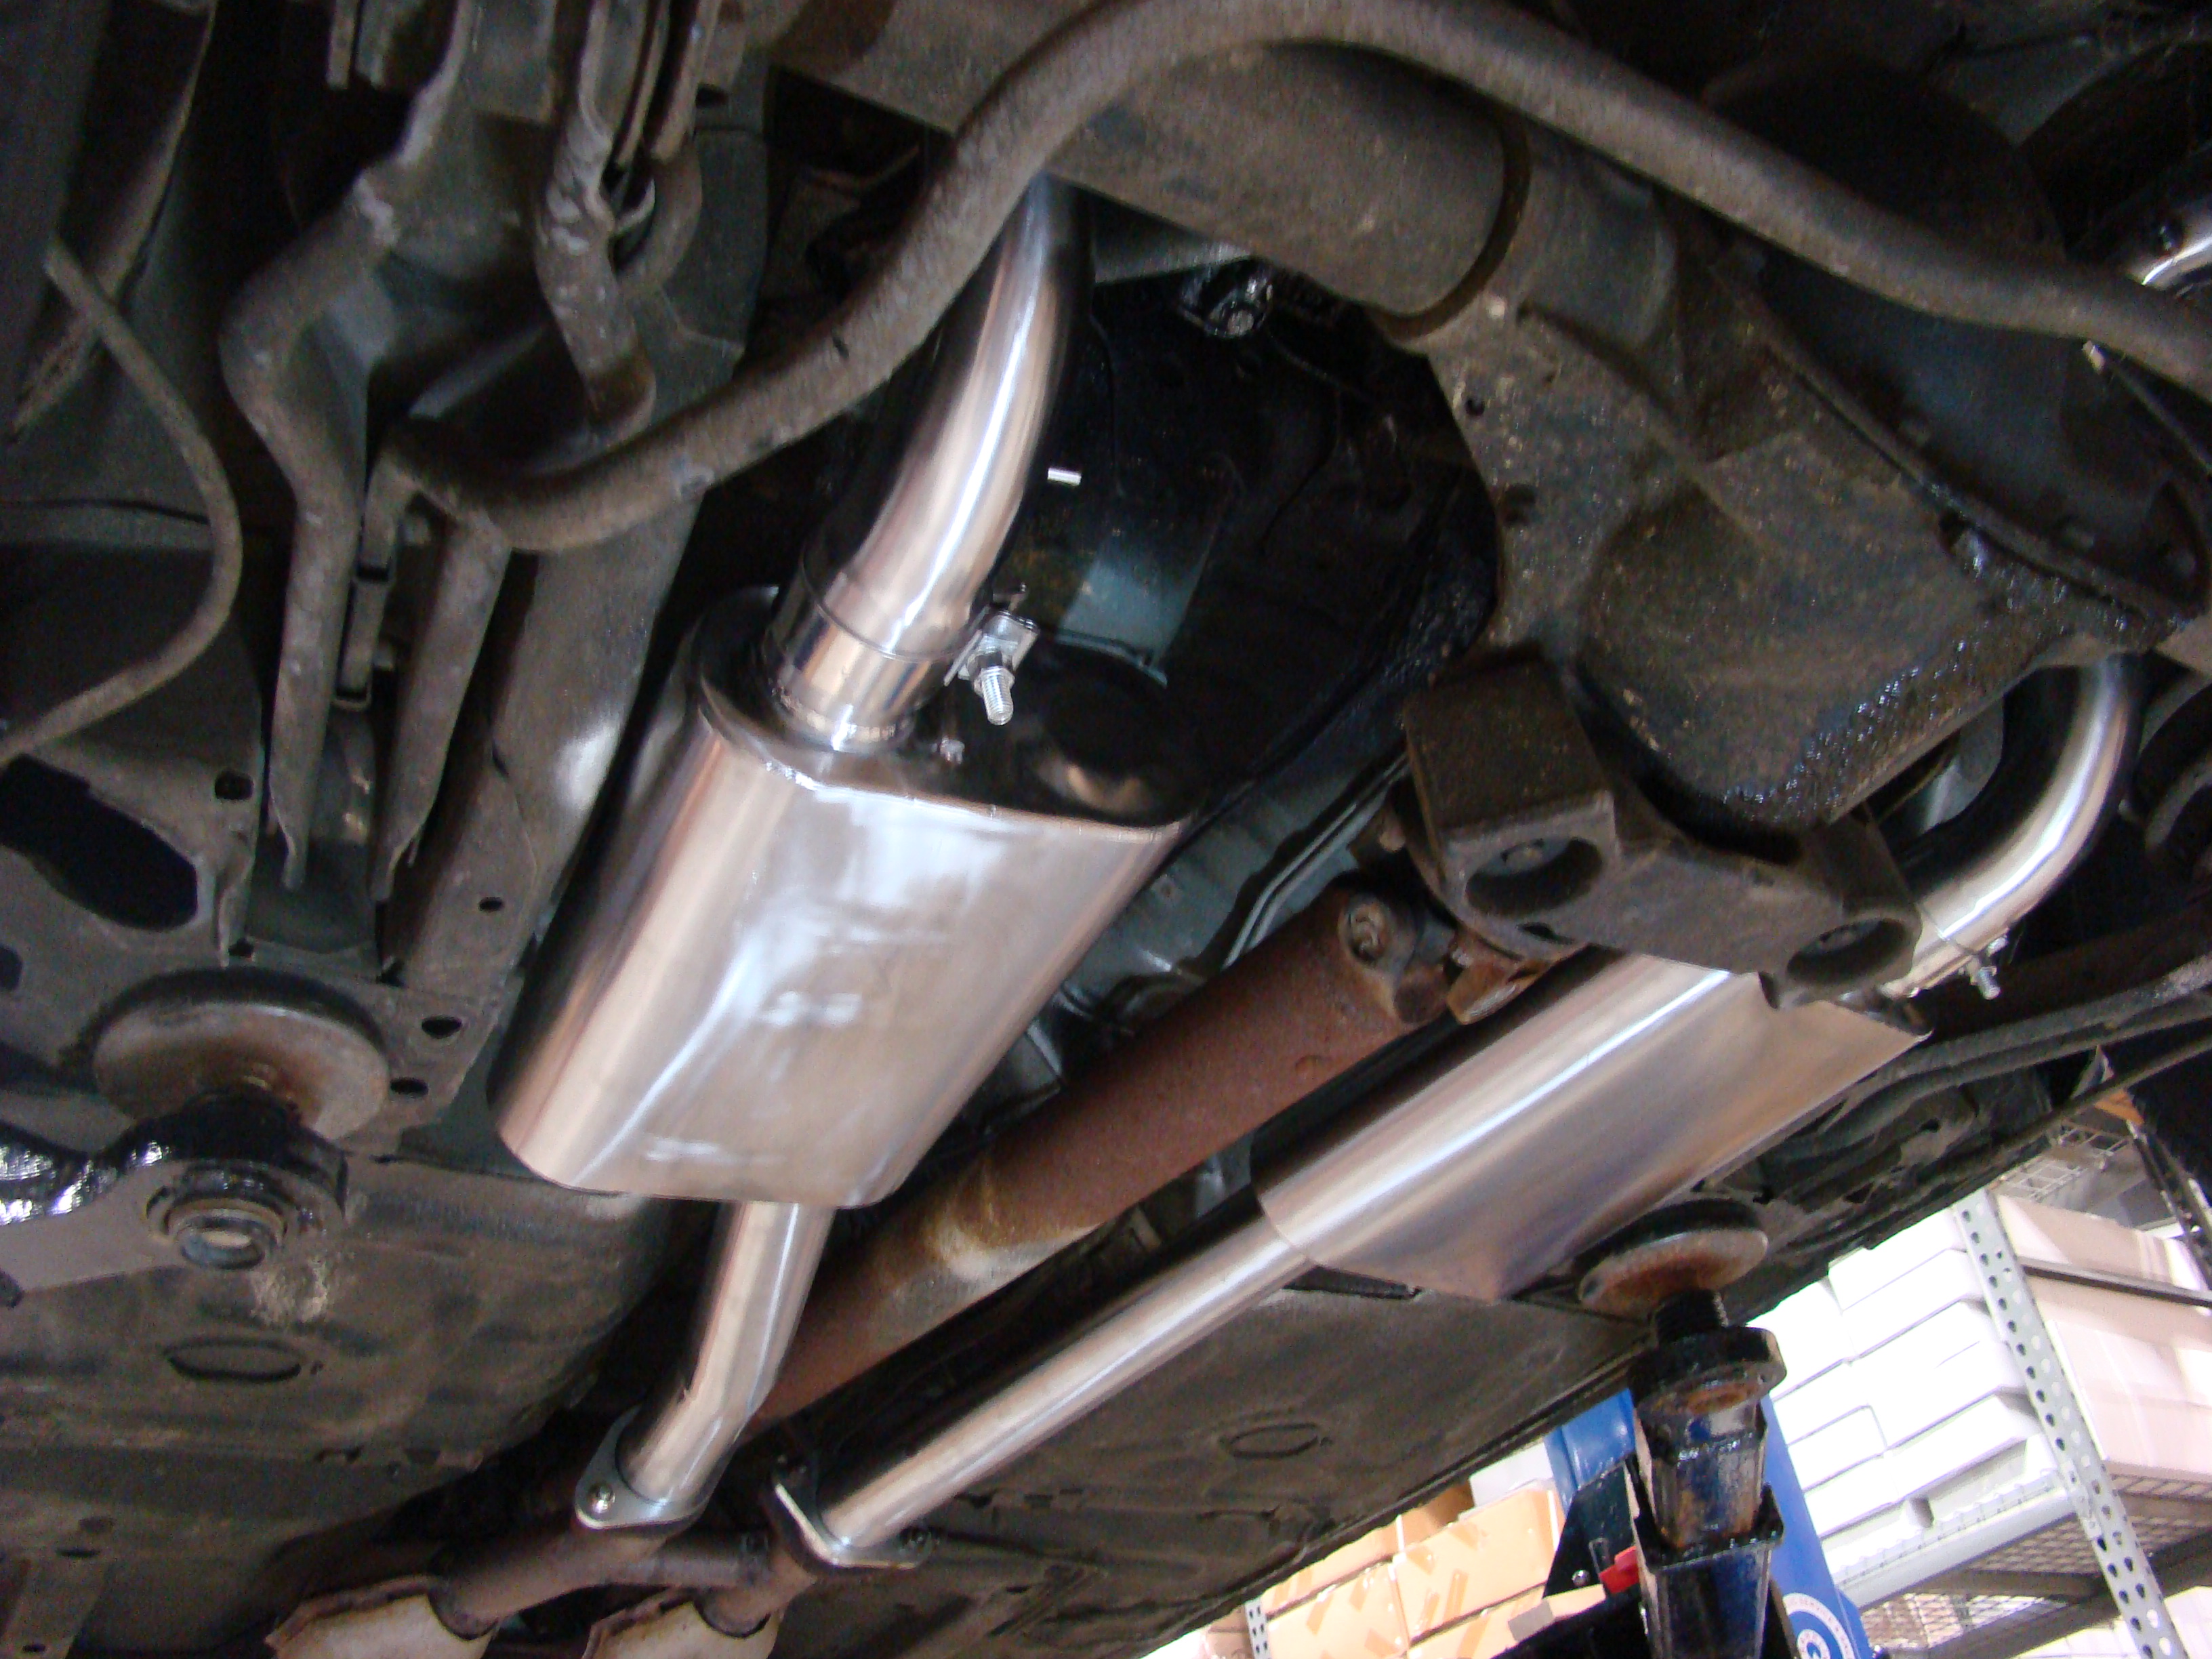 On 3 Performance Mustang Foxbody 5.0 LX Cat-back Exhaust System 1987